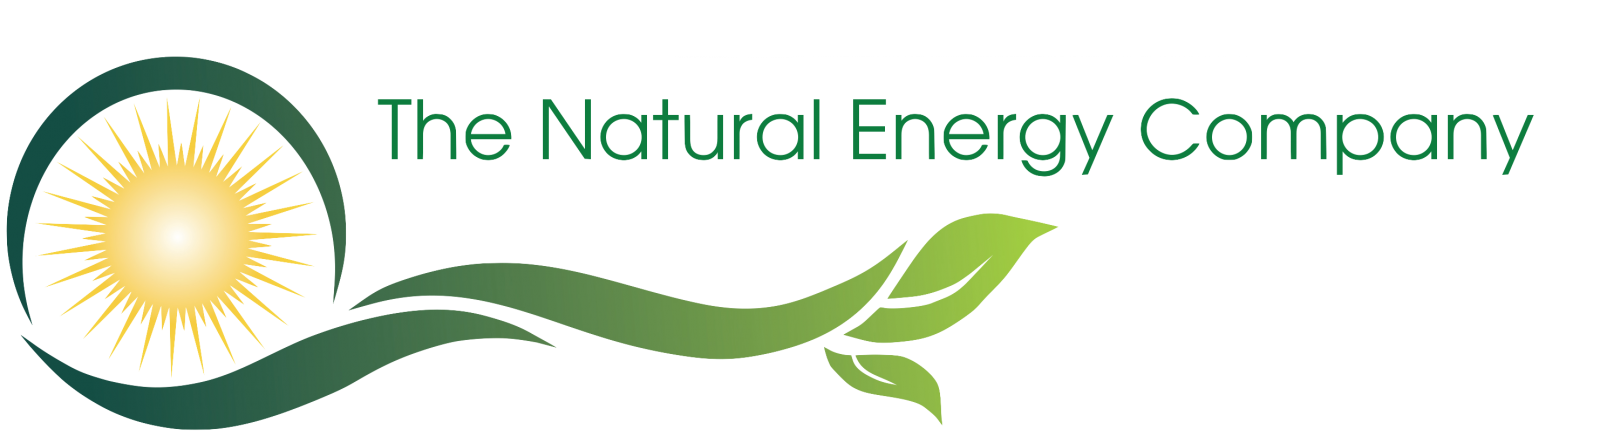 The Natural Energy Company  |  Solar PV FAQs